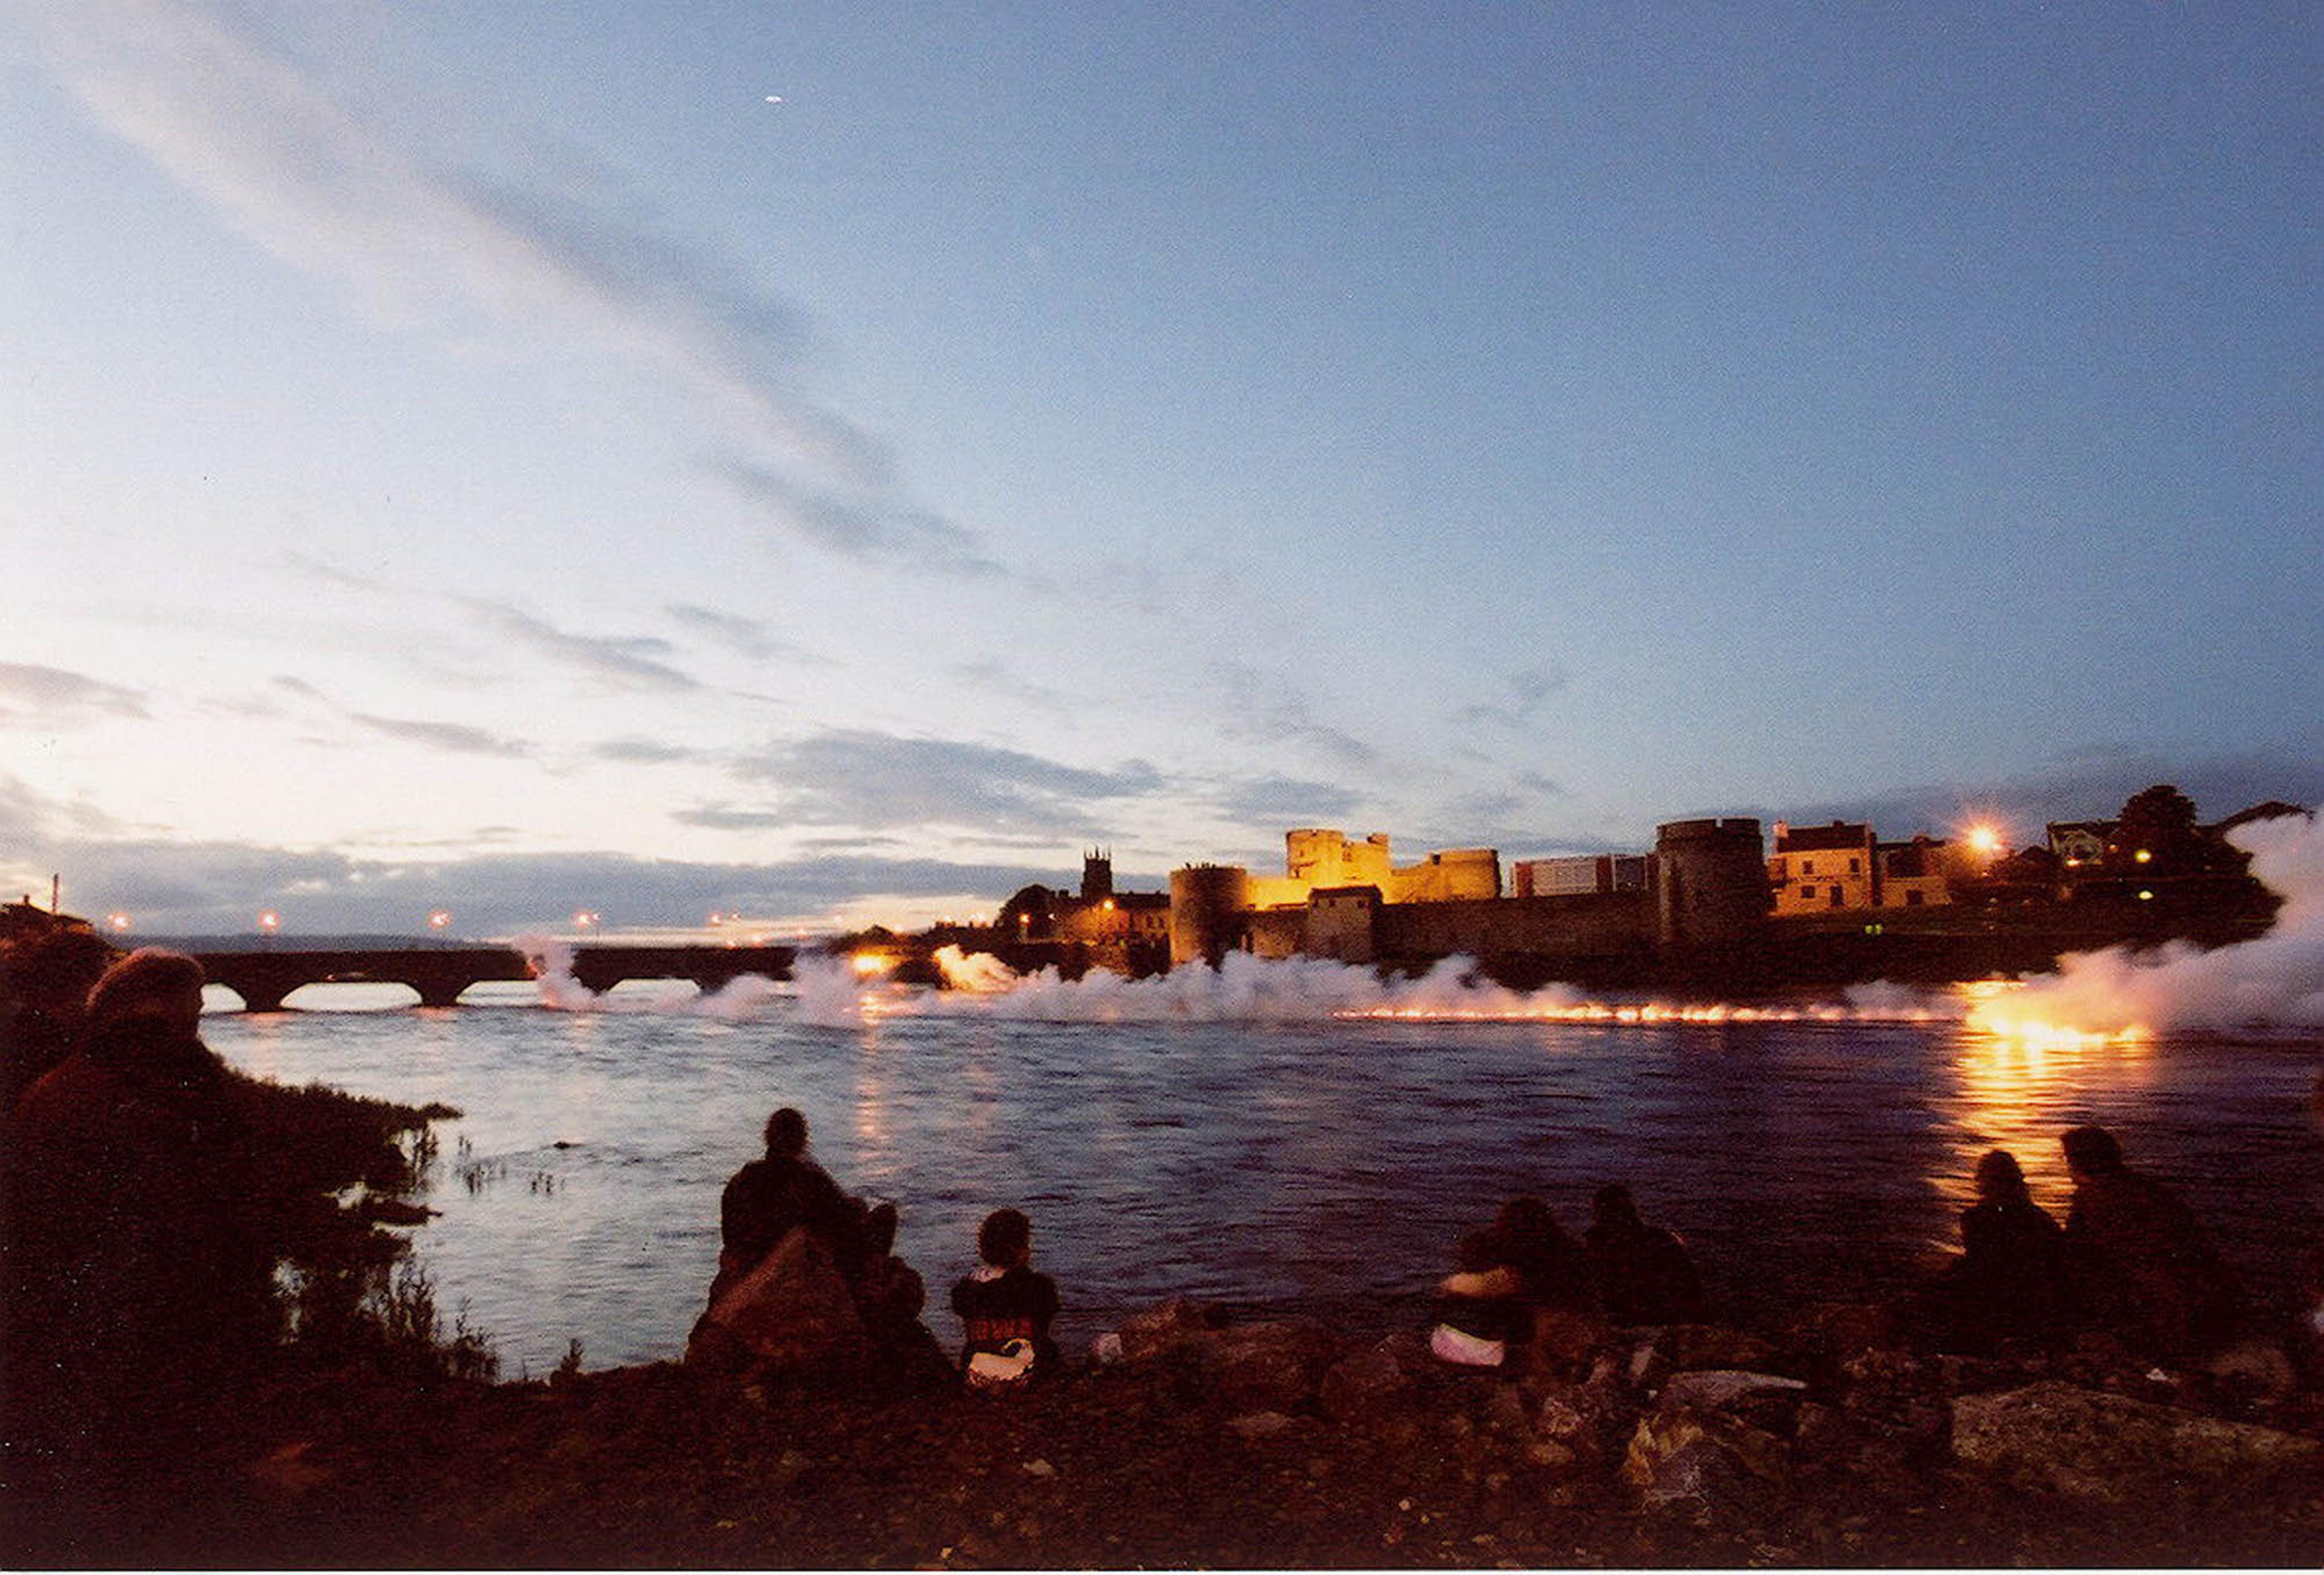 (2002) Cai Guo-Qiang, Against the Current, 2002, live performance using gunpowder on the river.